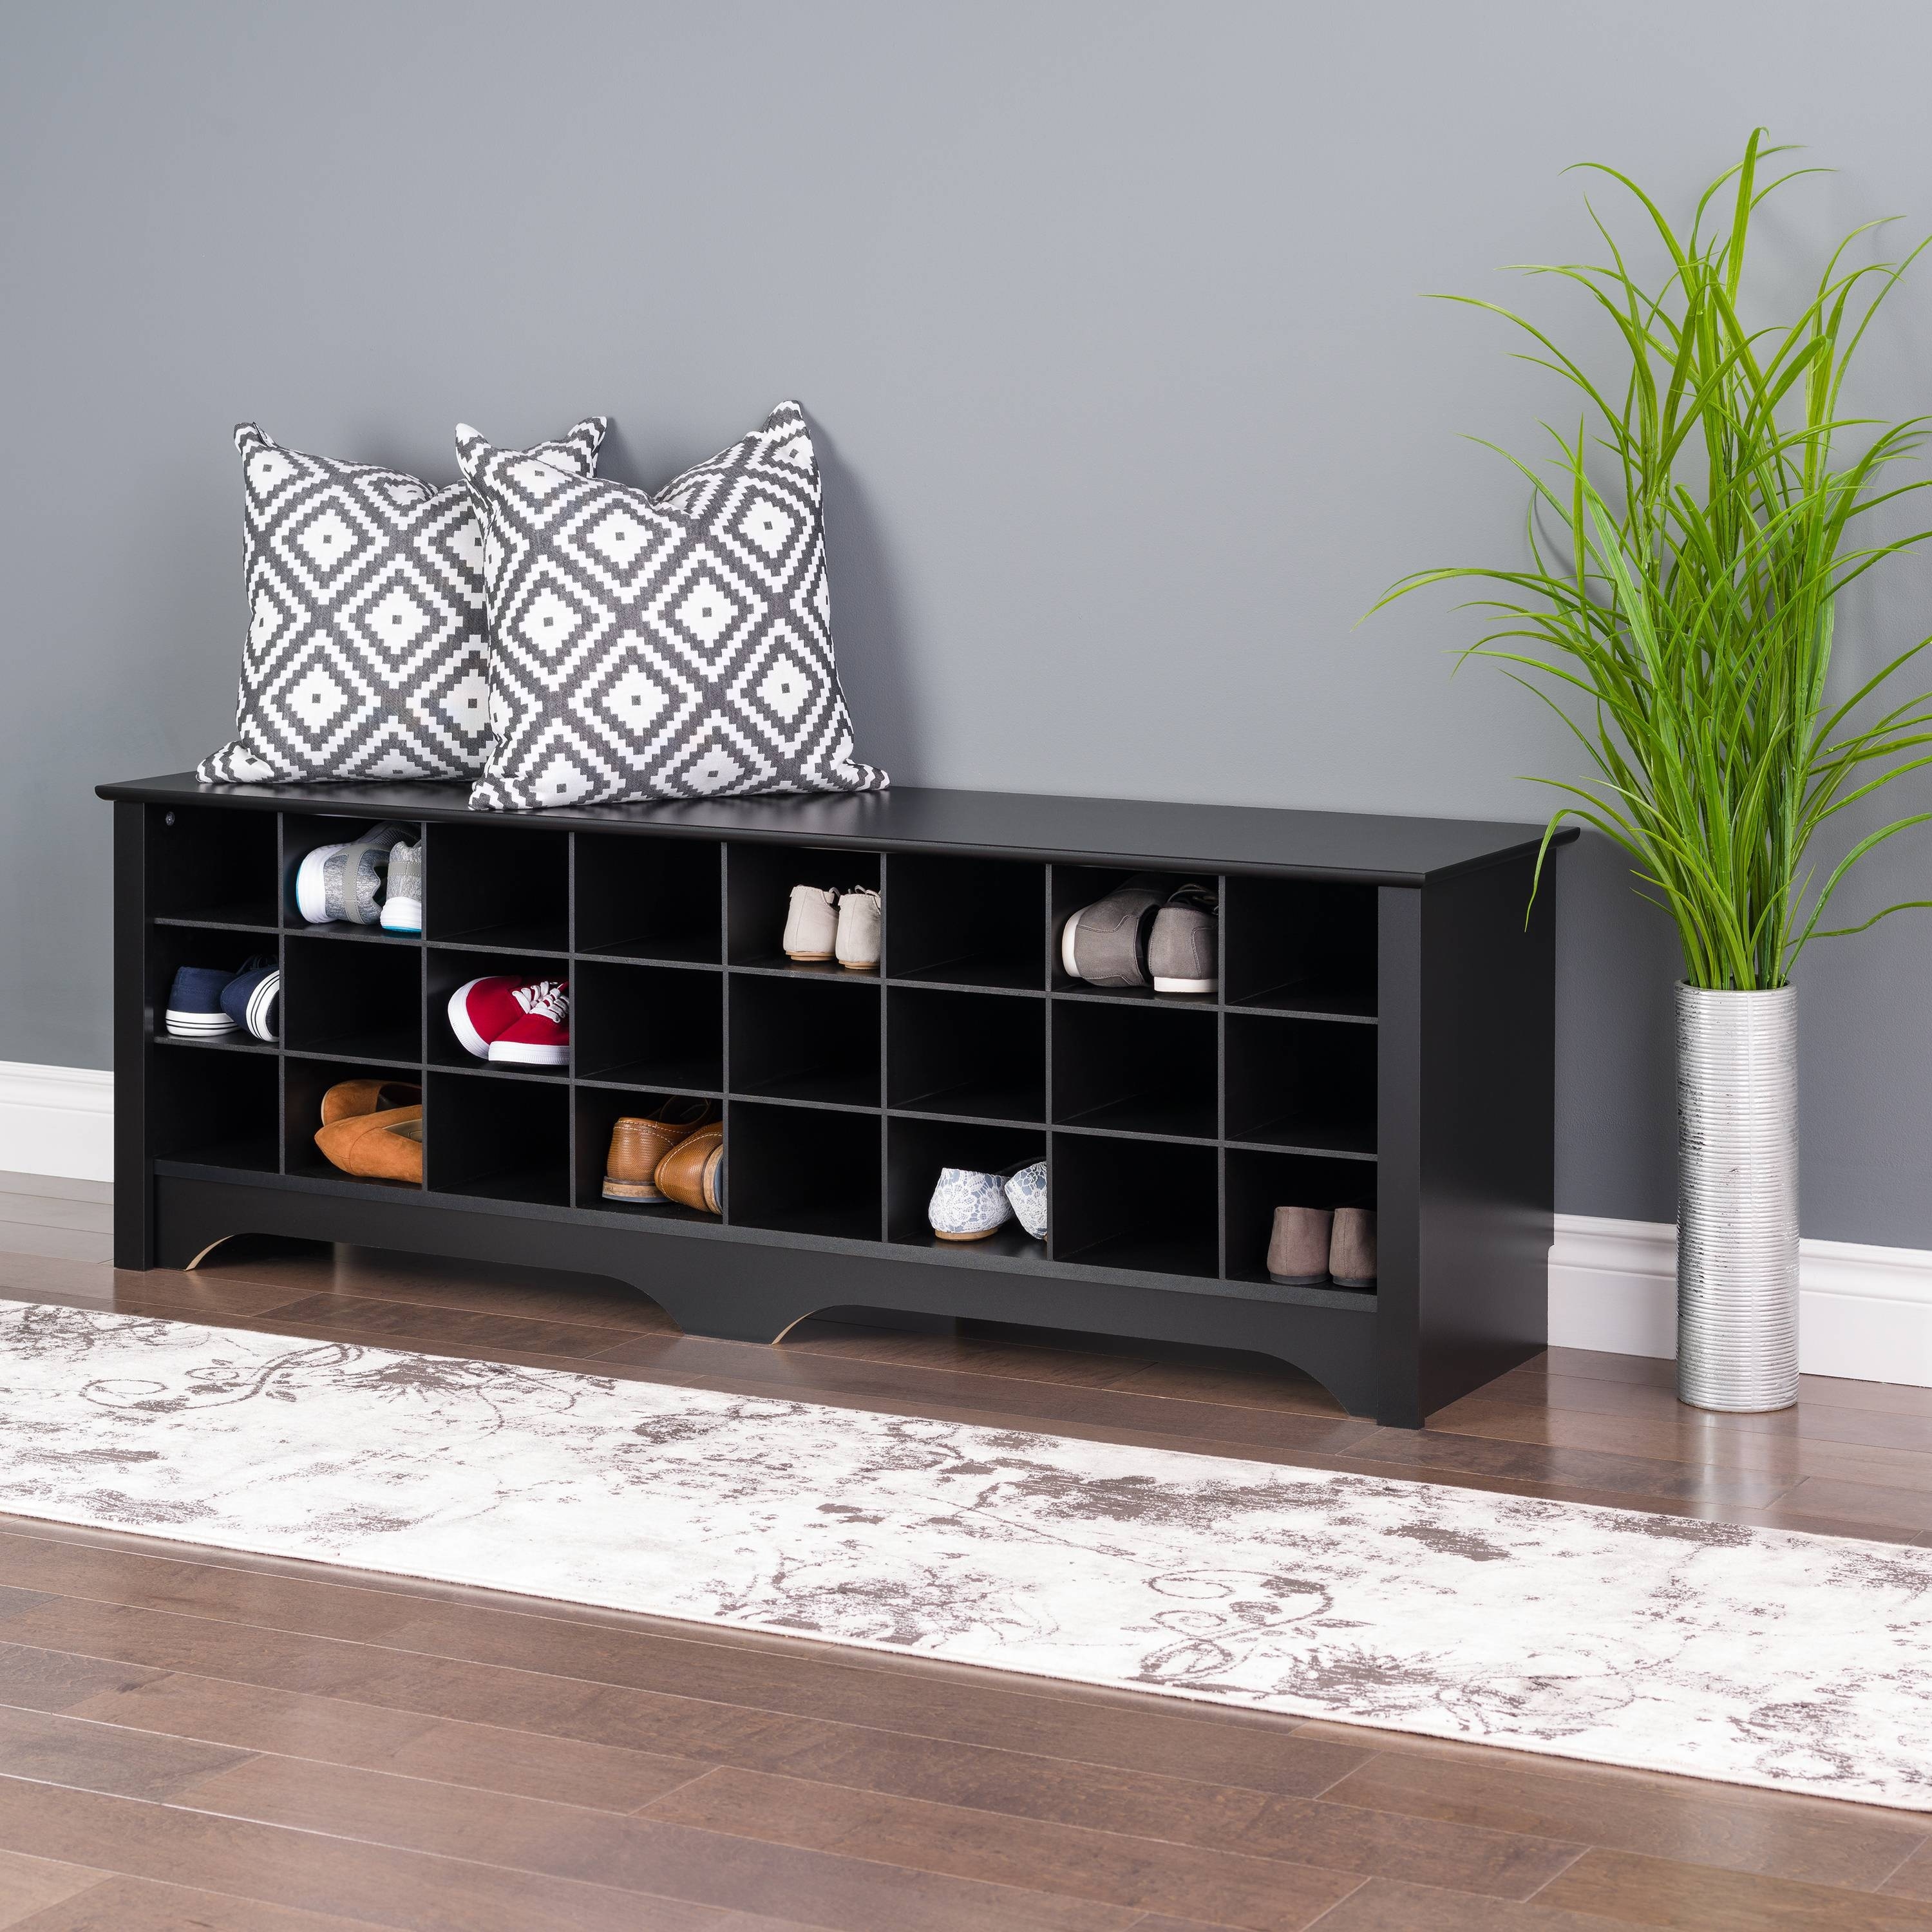 https://ak1.ostkcdn.com/images/products/is/images/direct/7646bd97a0f327947a57b6a465e6b405e8b4f8bf/Prepac-60%22-Shoe-Cubby-Bench%2C-Multiple-Finishes.jpg